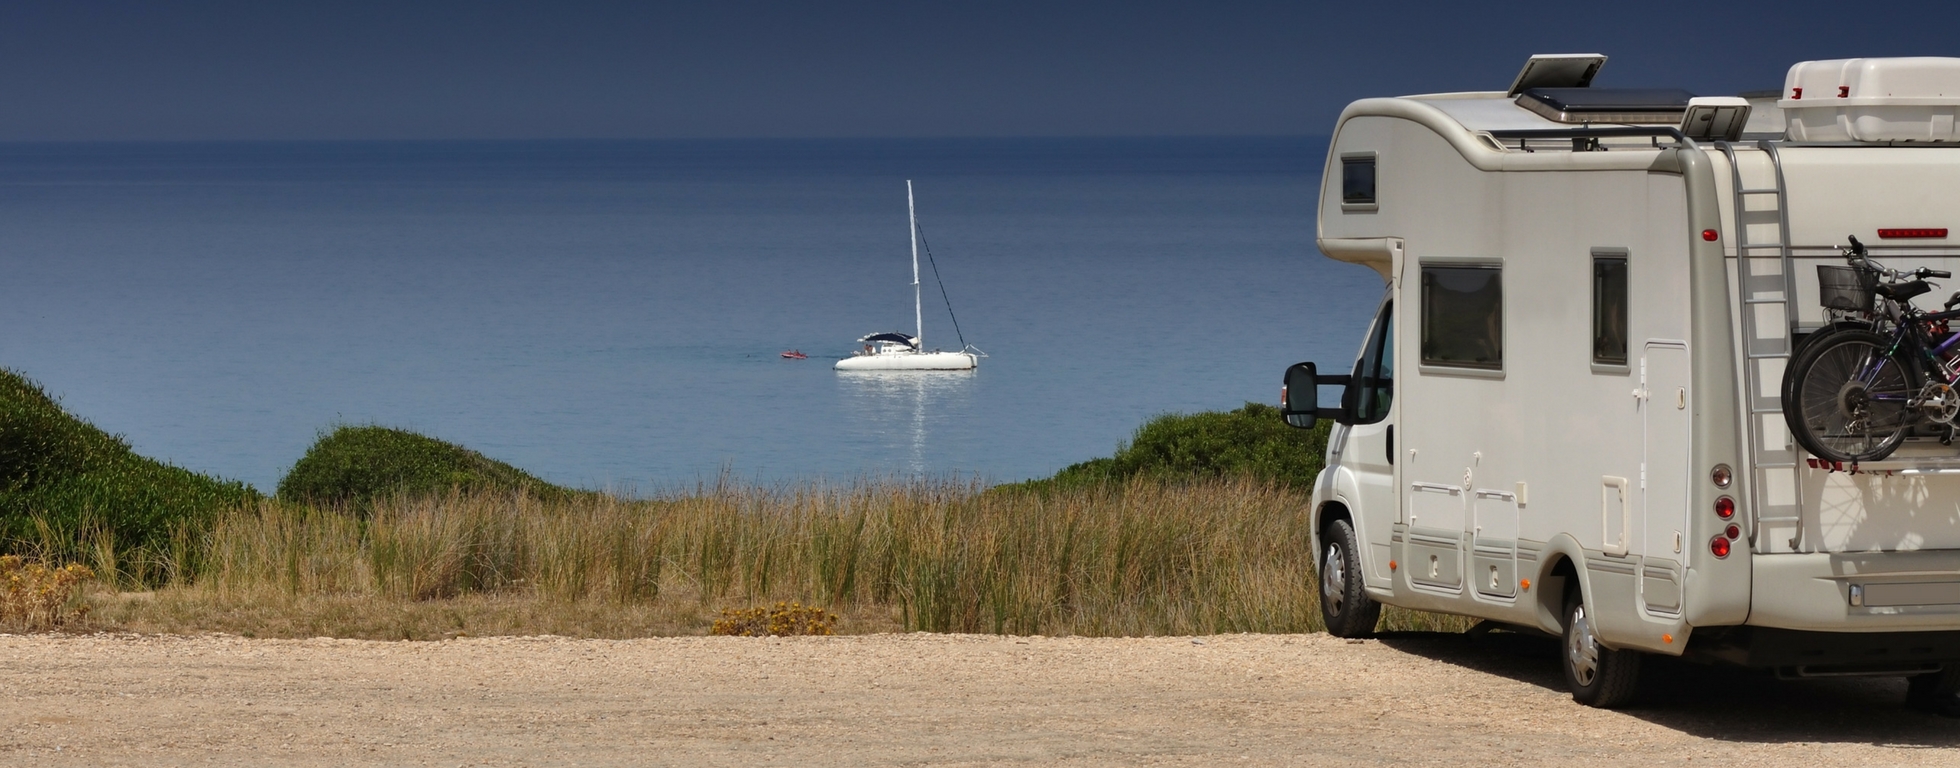 Insurance campervan and motorhome hire